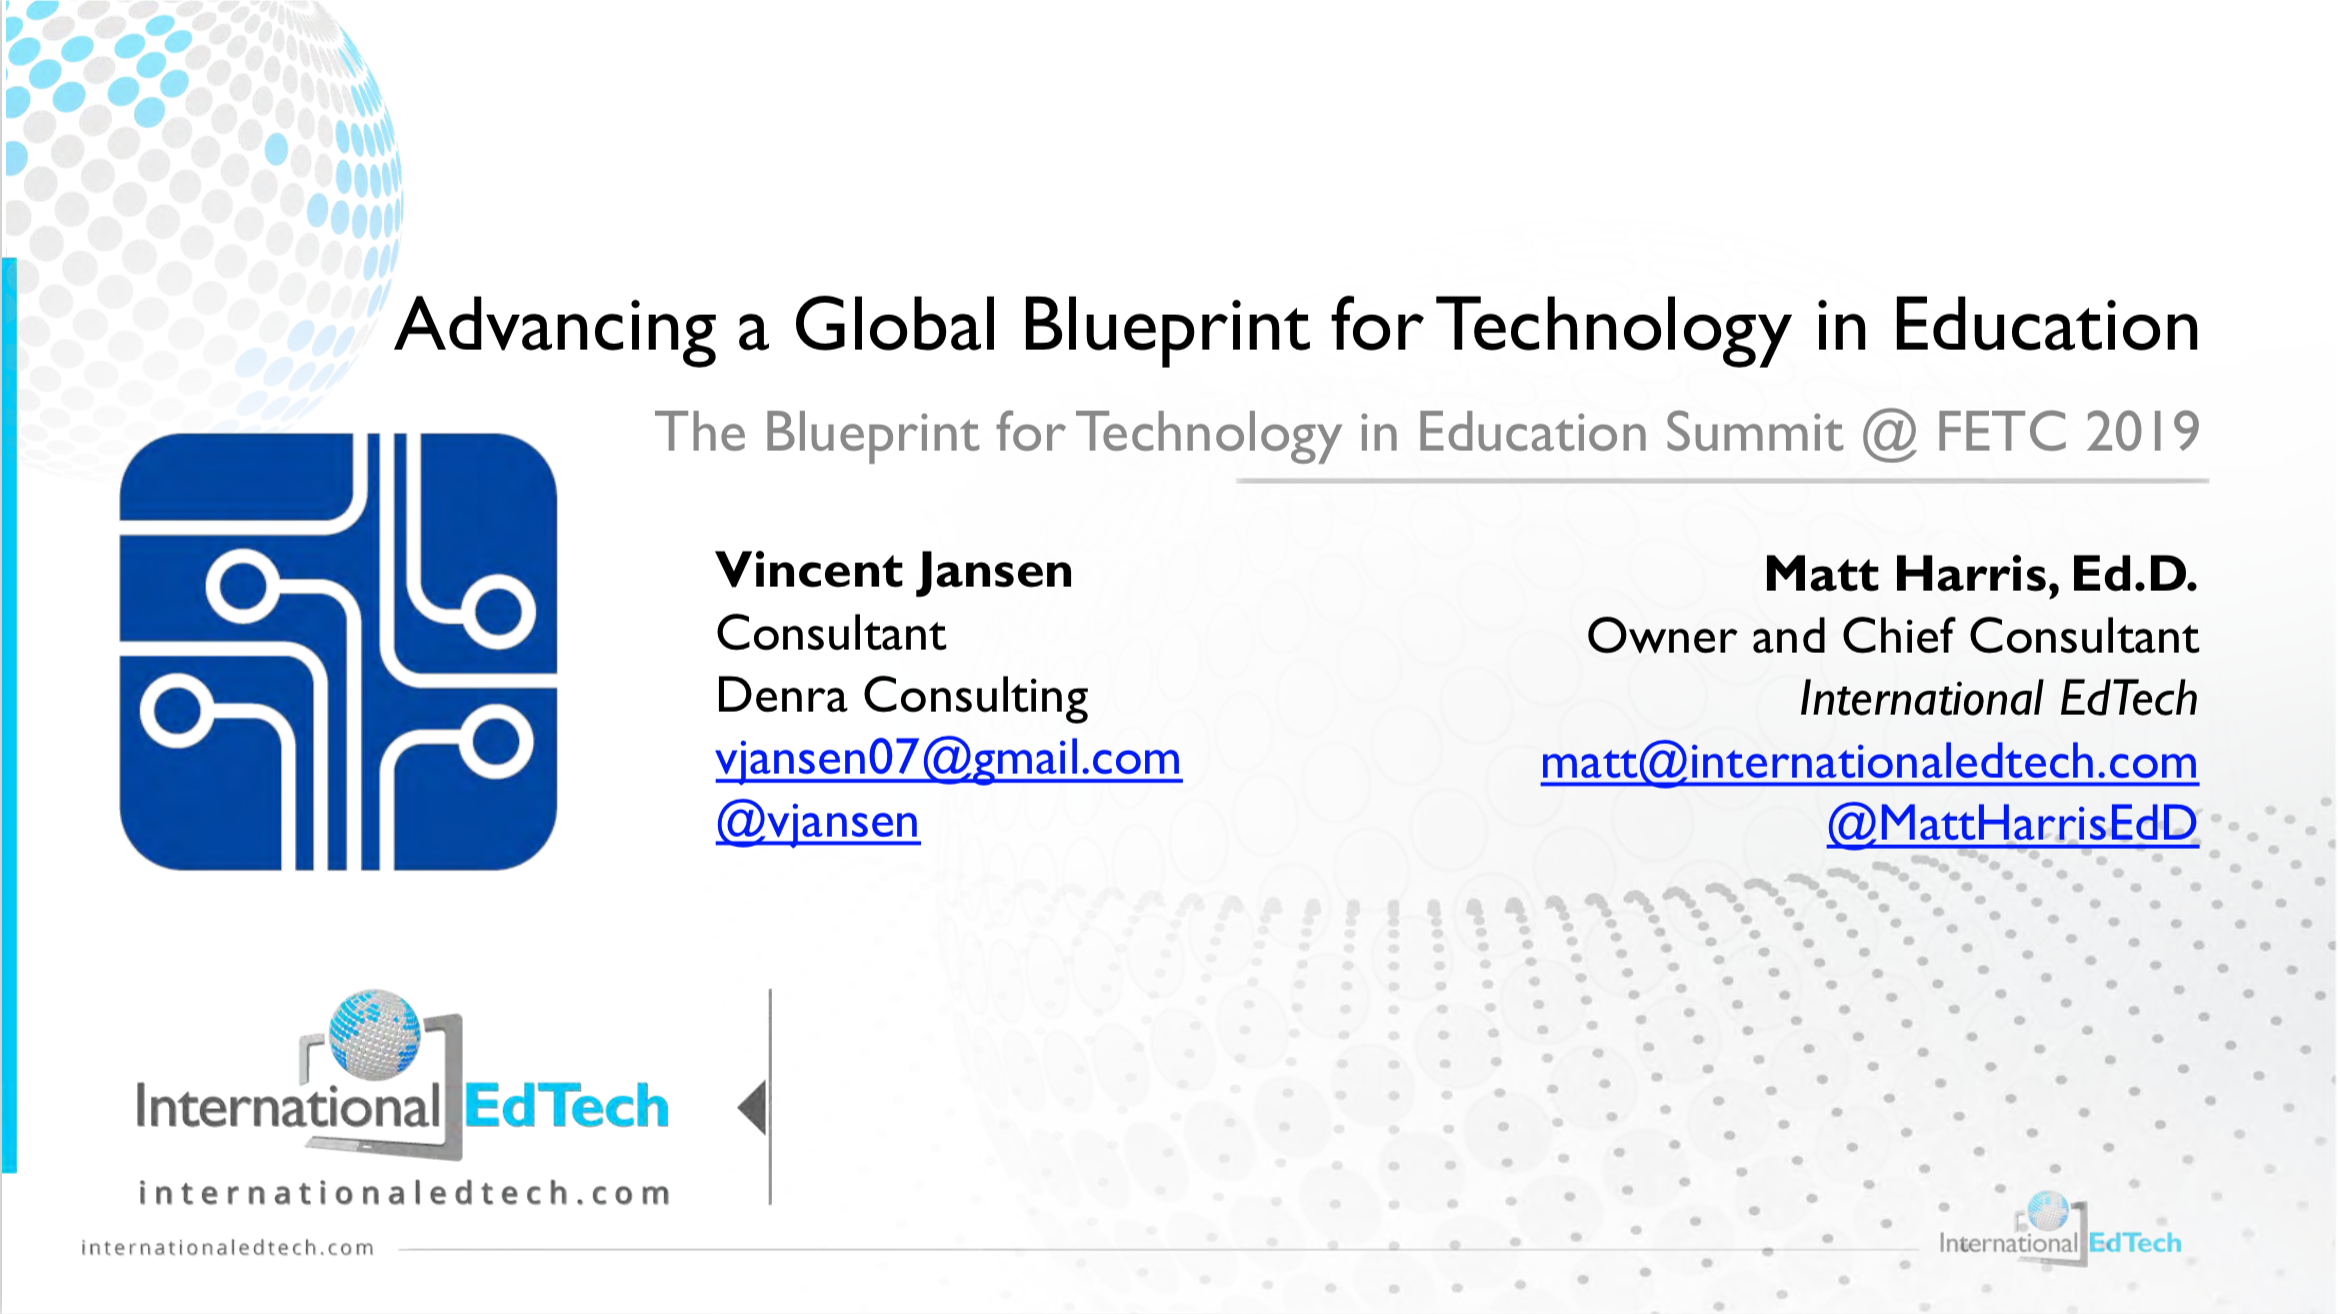 Advancing a Global Blueprint for Technology in Education - FETC 2019